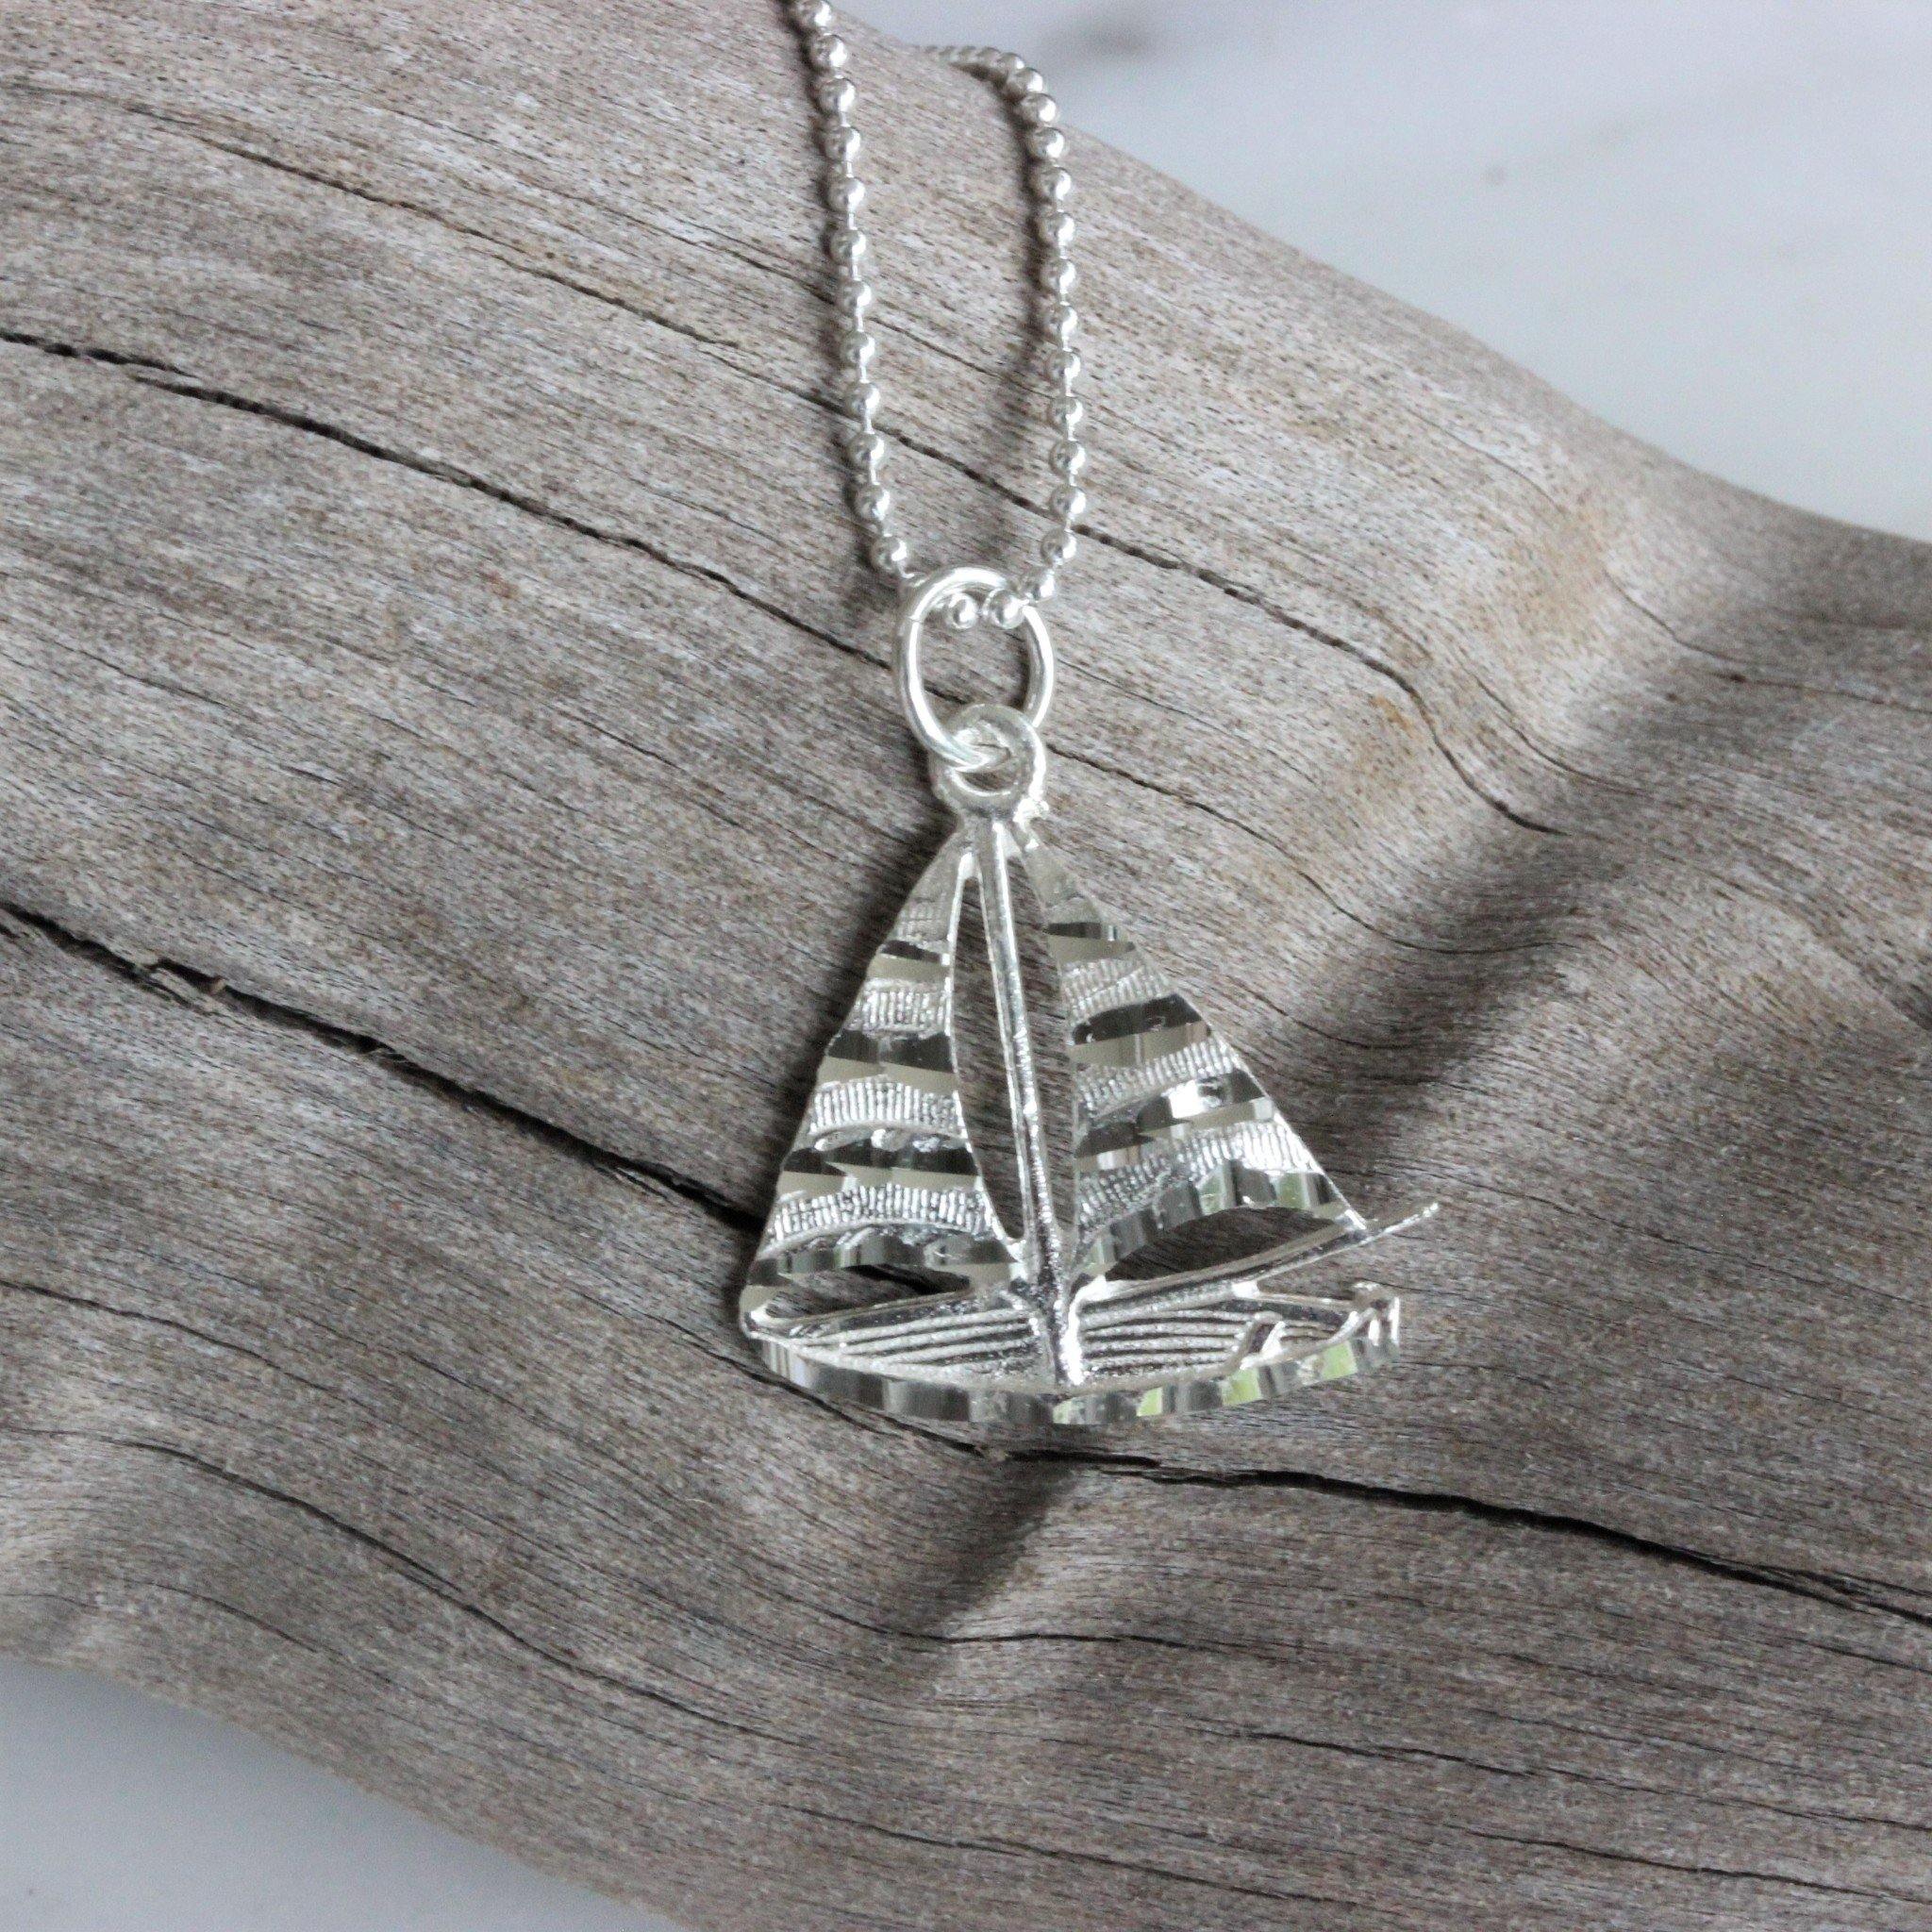 Sterling Silver 925 Sailing Boat Pendant & 45cm Ball Bead Chain Necklace - STERLING SILVER DESIGNS